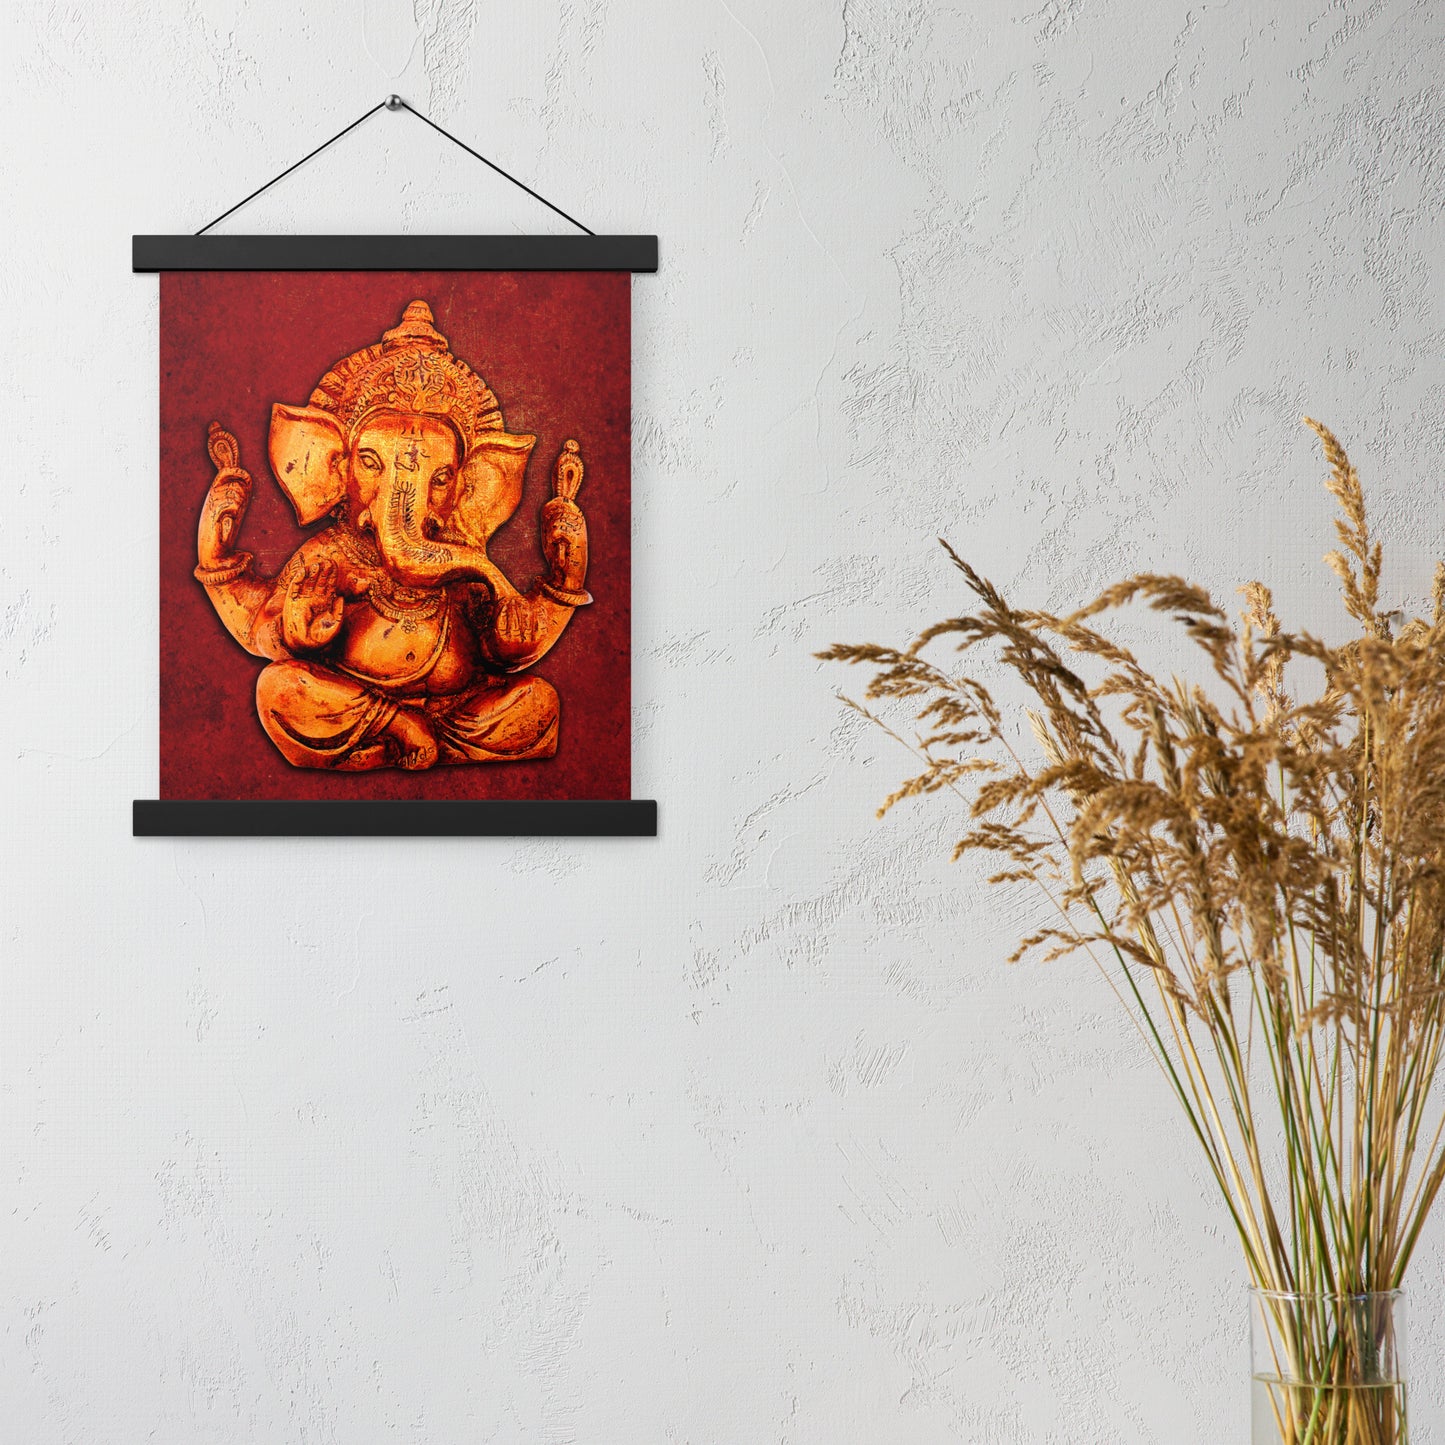 Wall Art Golden Ganesha on a Distressed Lava Red Background Printed on Archival Paper with Magnetic Wood Hangers 11x14 hung